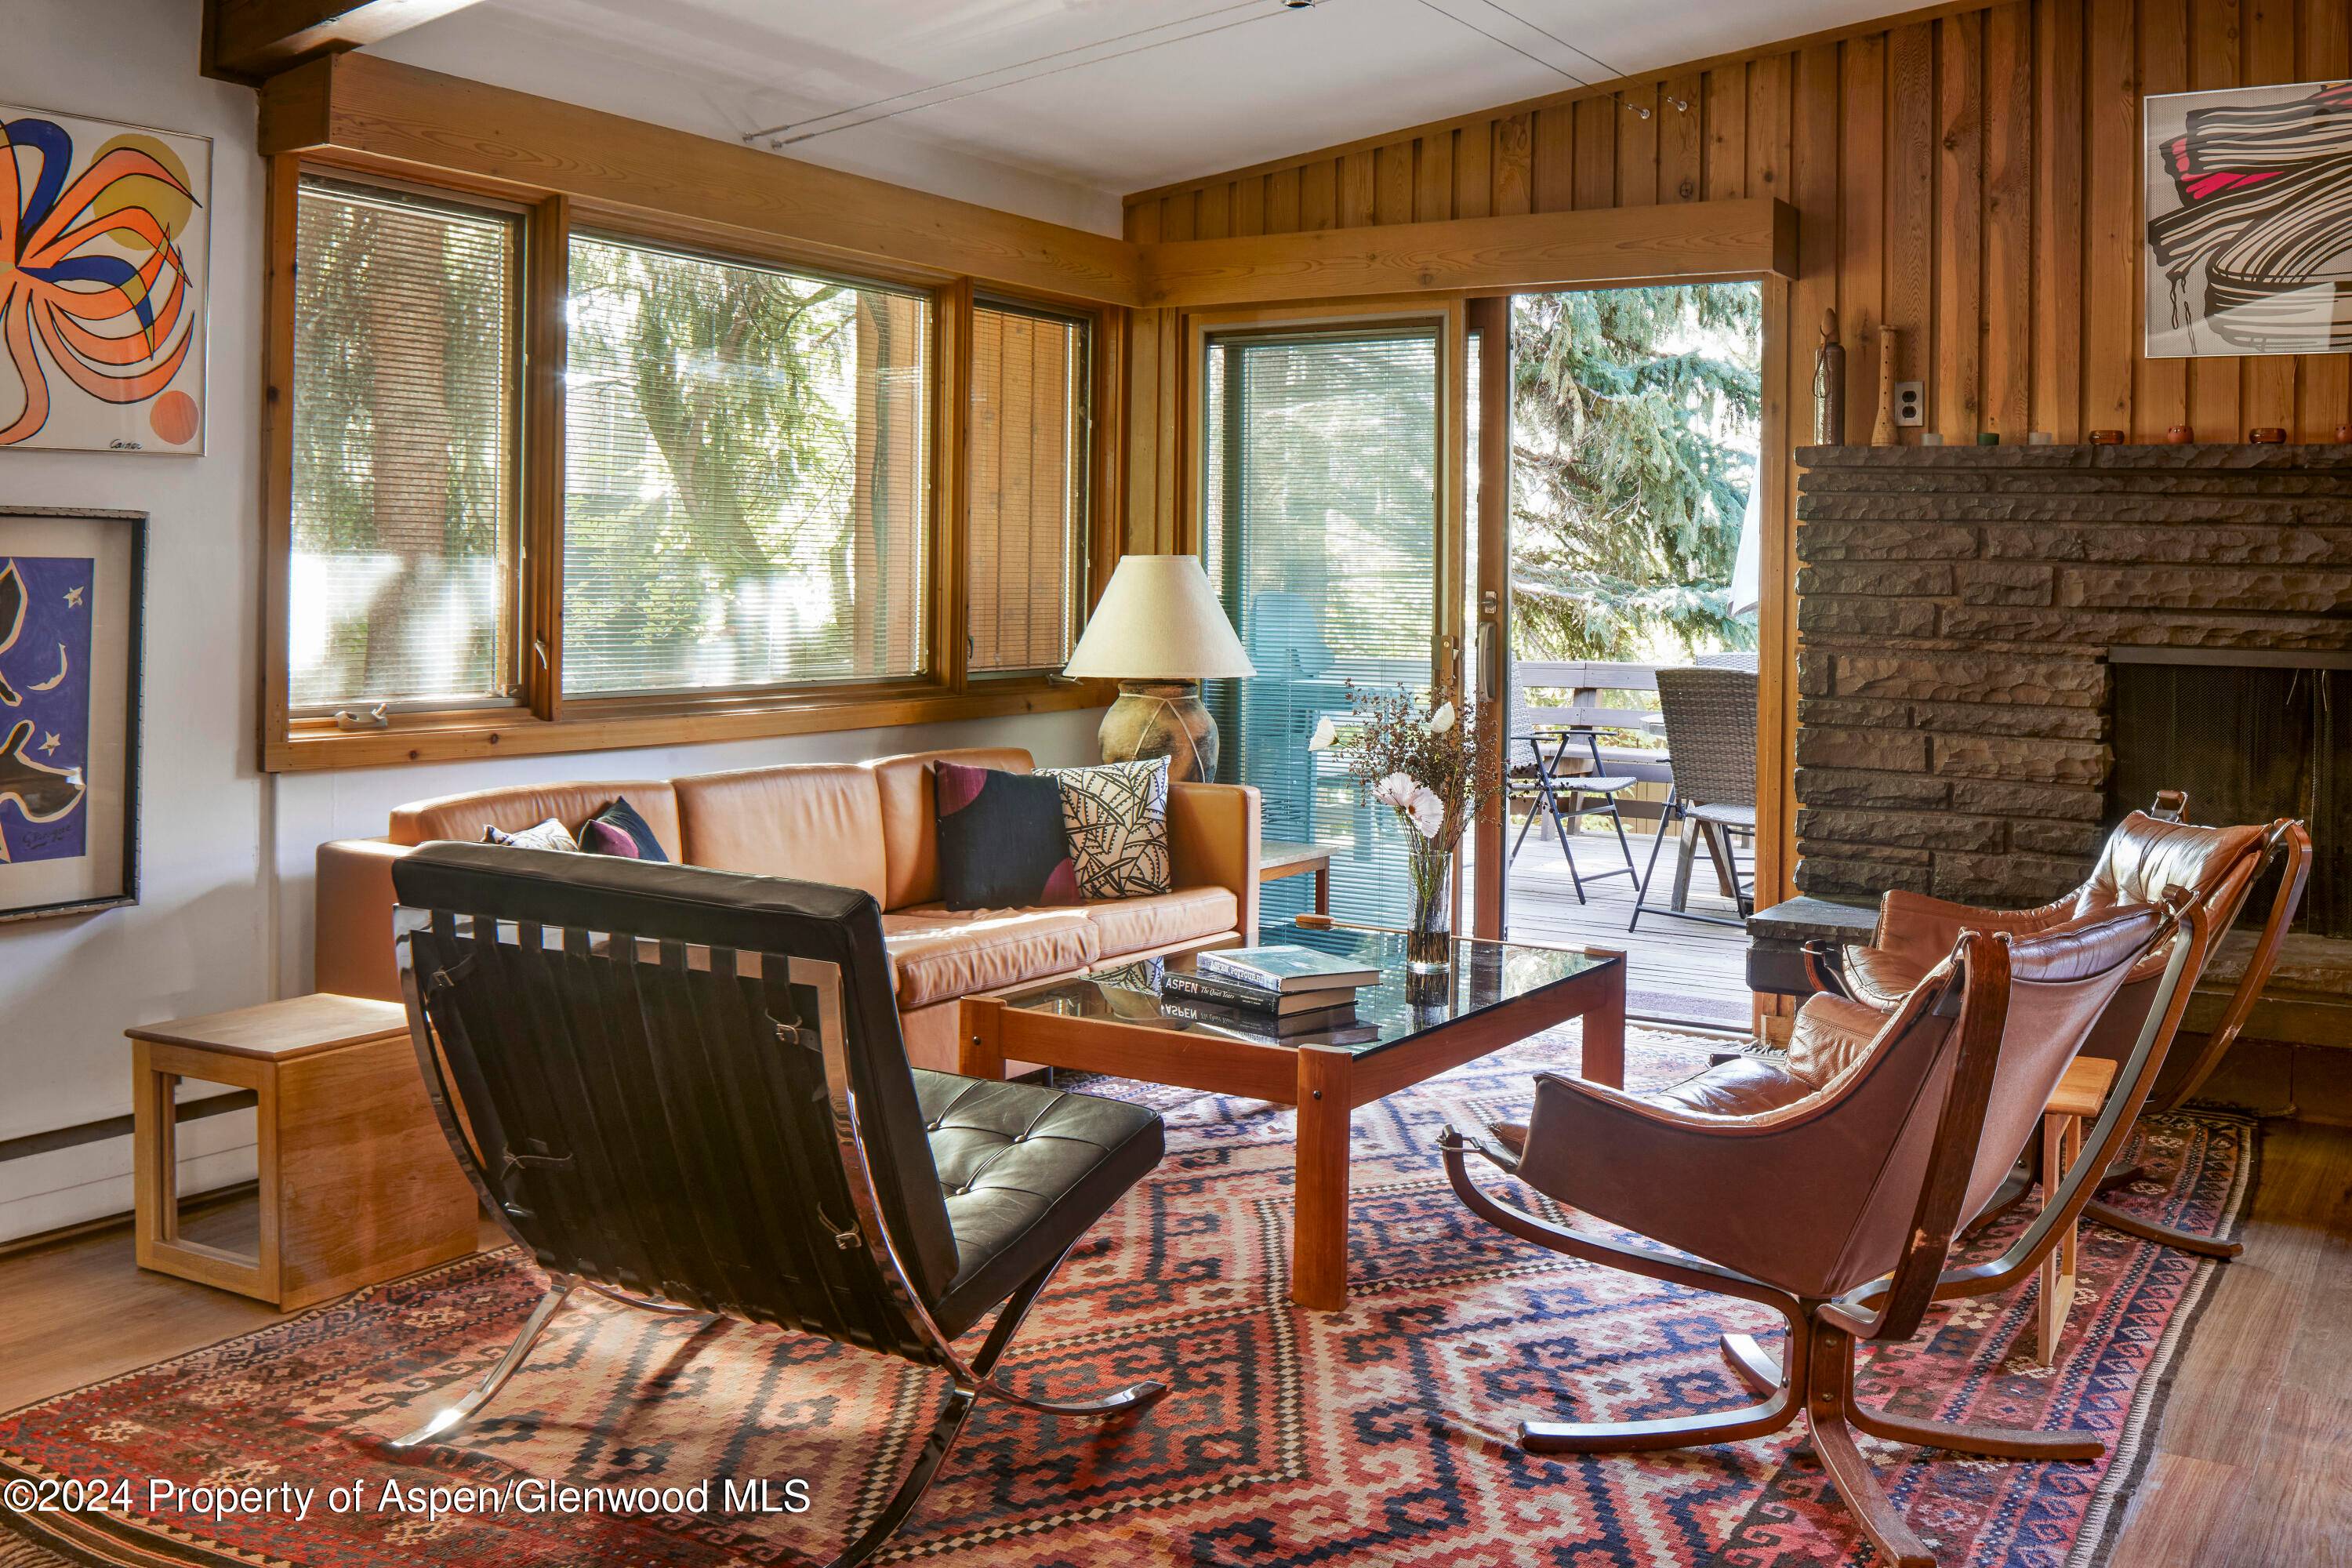 A modernist take on a mountain ski chalet designed by Herbert Bayer is the perfect year round rental for the outdoors, art, and entertainment enthusiast.